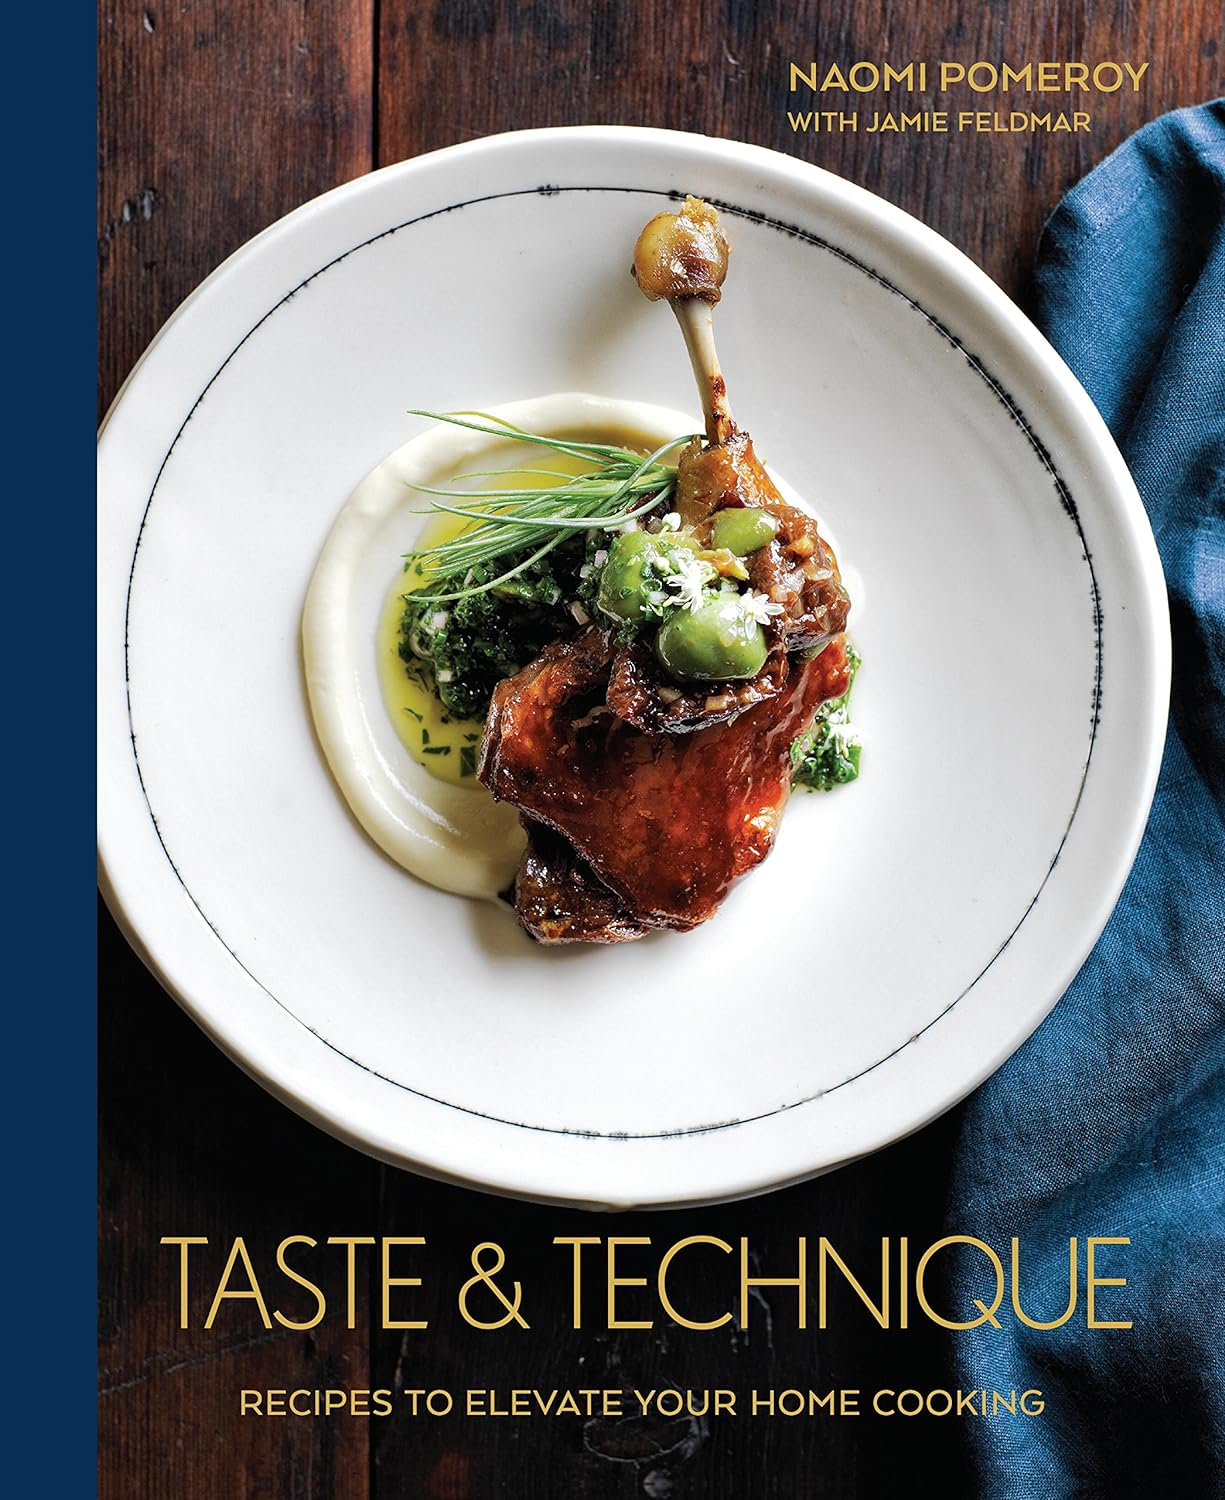 Taste & Technique: Recipes to Elevate Your Home Cooking [A Cookbook] by Naomi Pomeroy (Author) Format: HARD COVER Edition - Chef Stuff